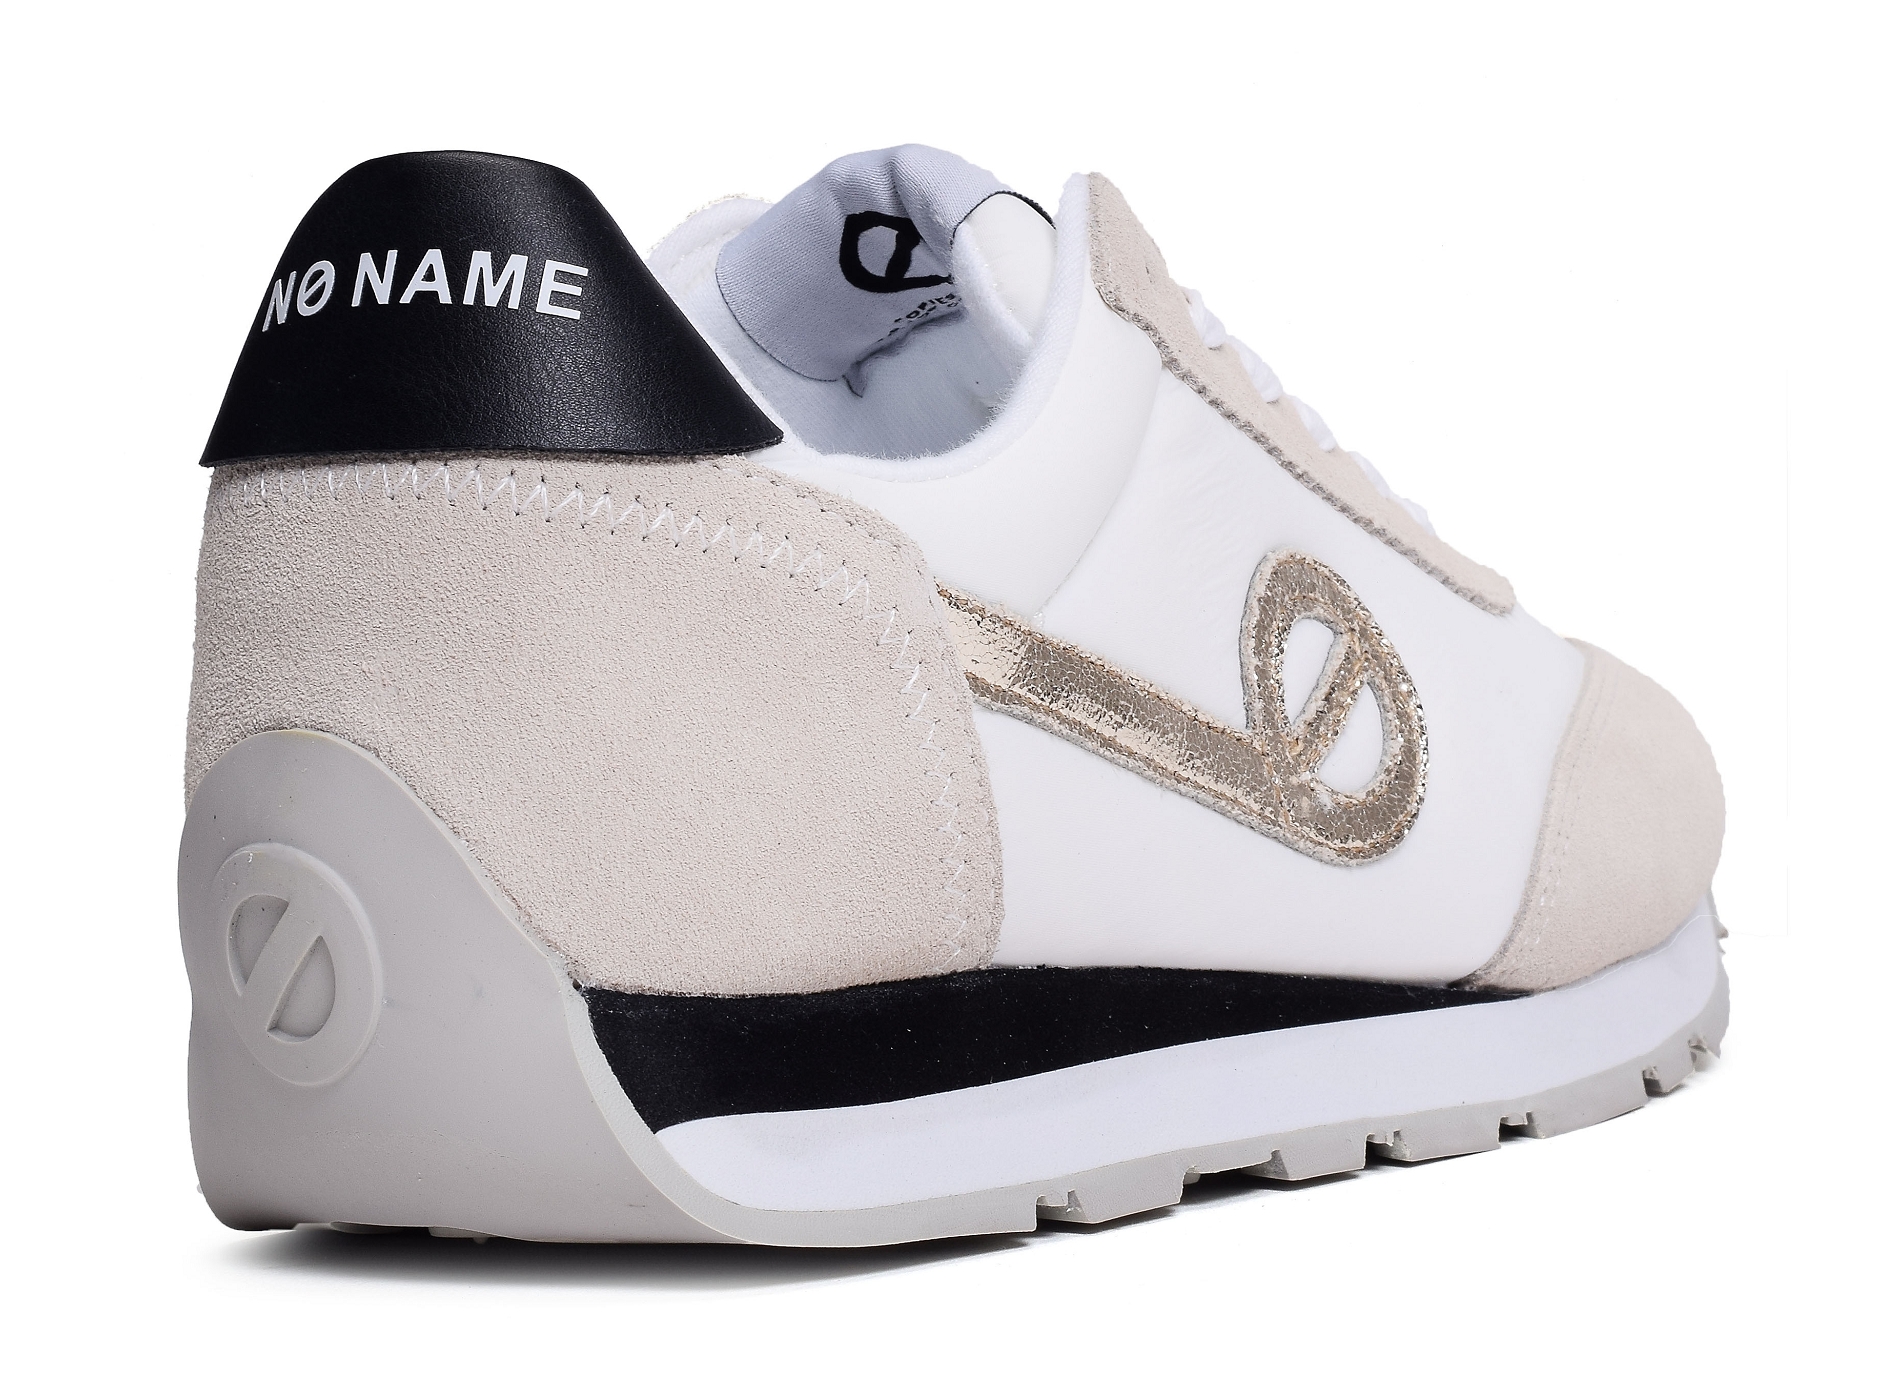 Baskets City Run Jogger Blanc - NO NAME - Homme - Cuir - Lacets - Plat